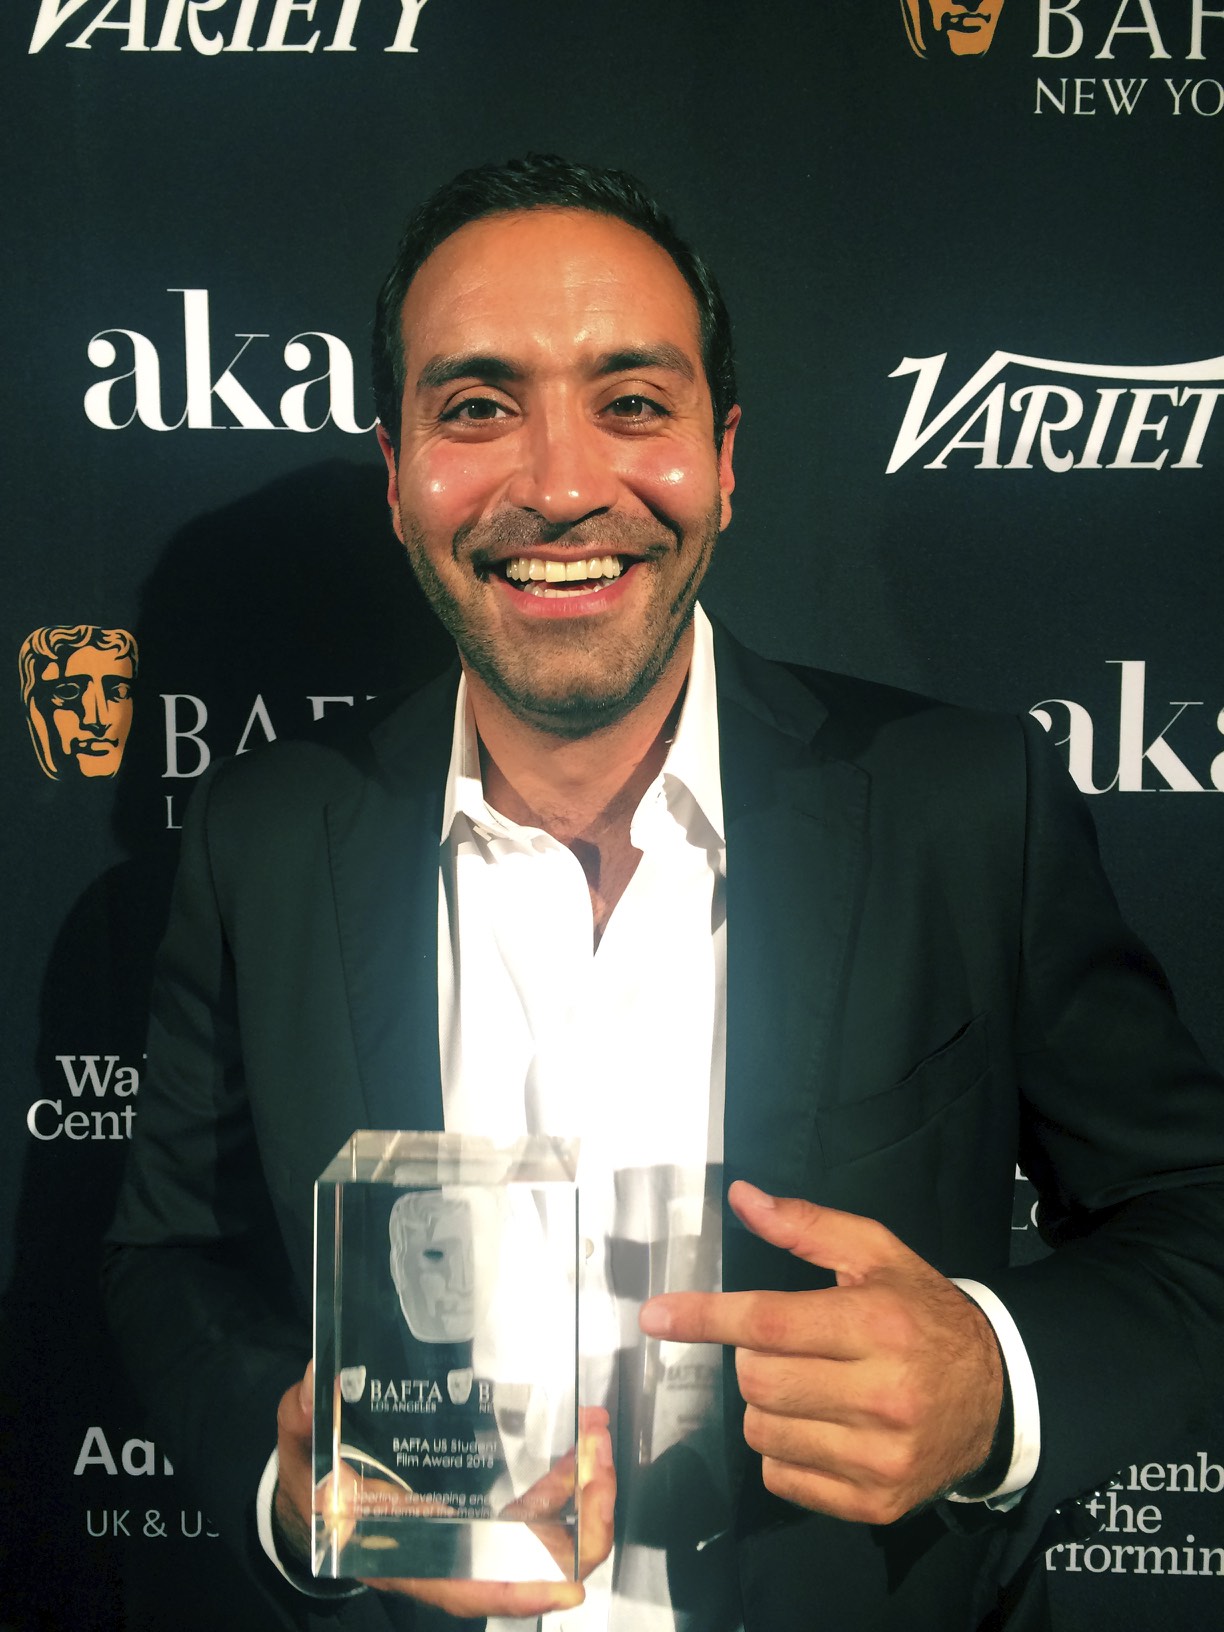 After DAY ONE won the LA/ BAFTA award for Best Short